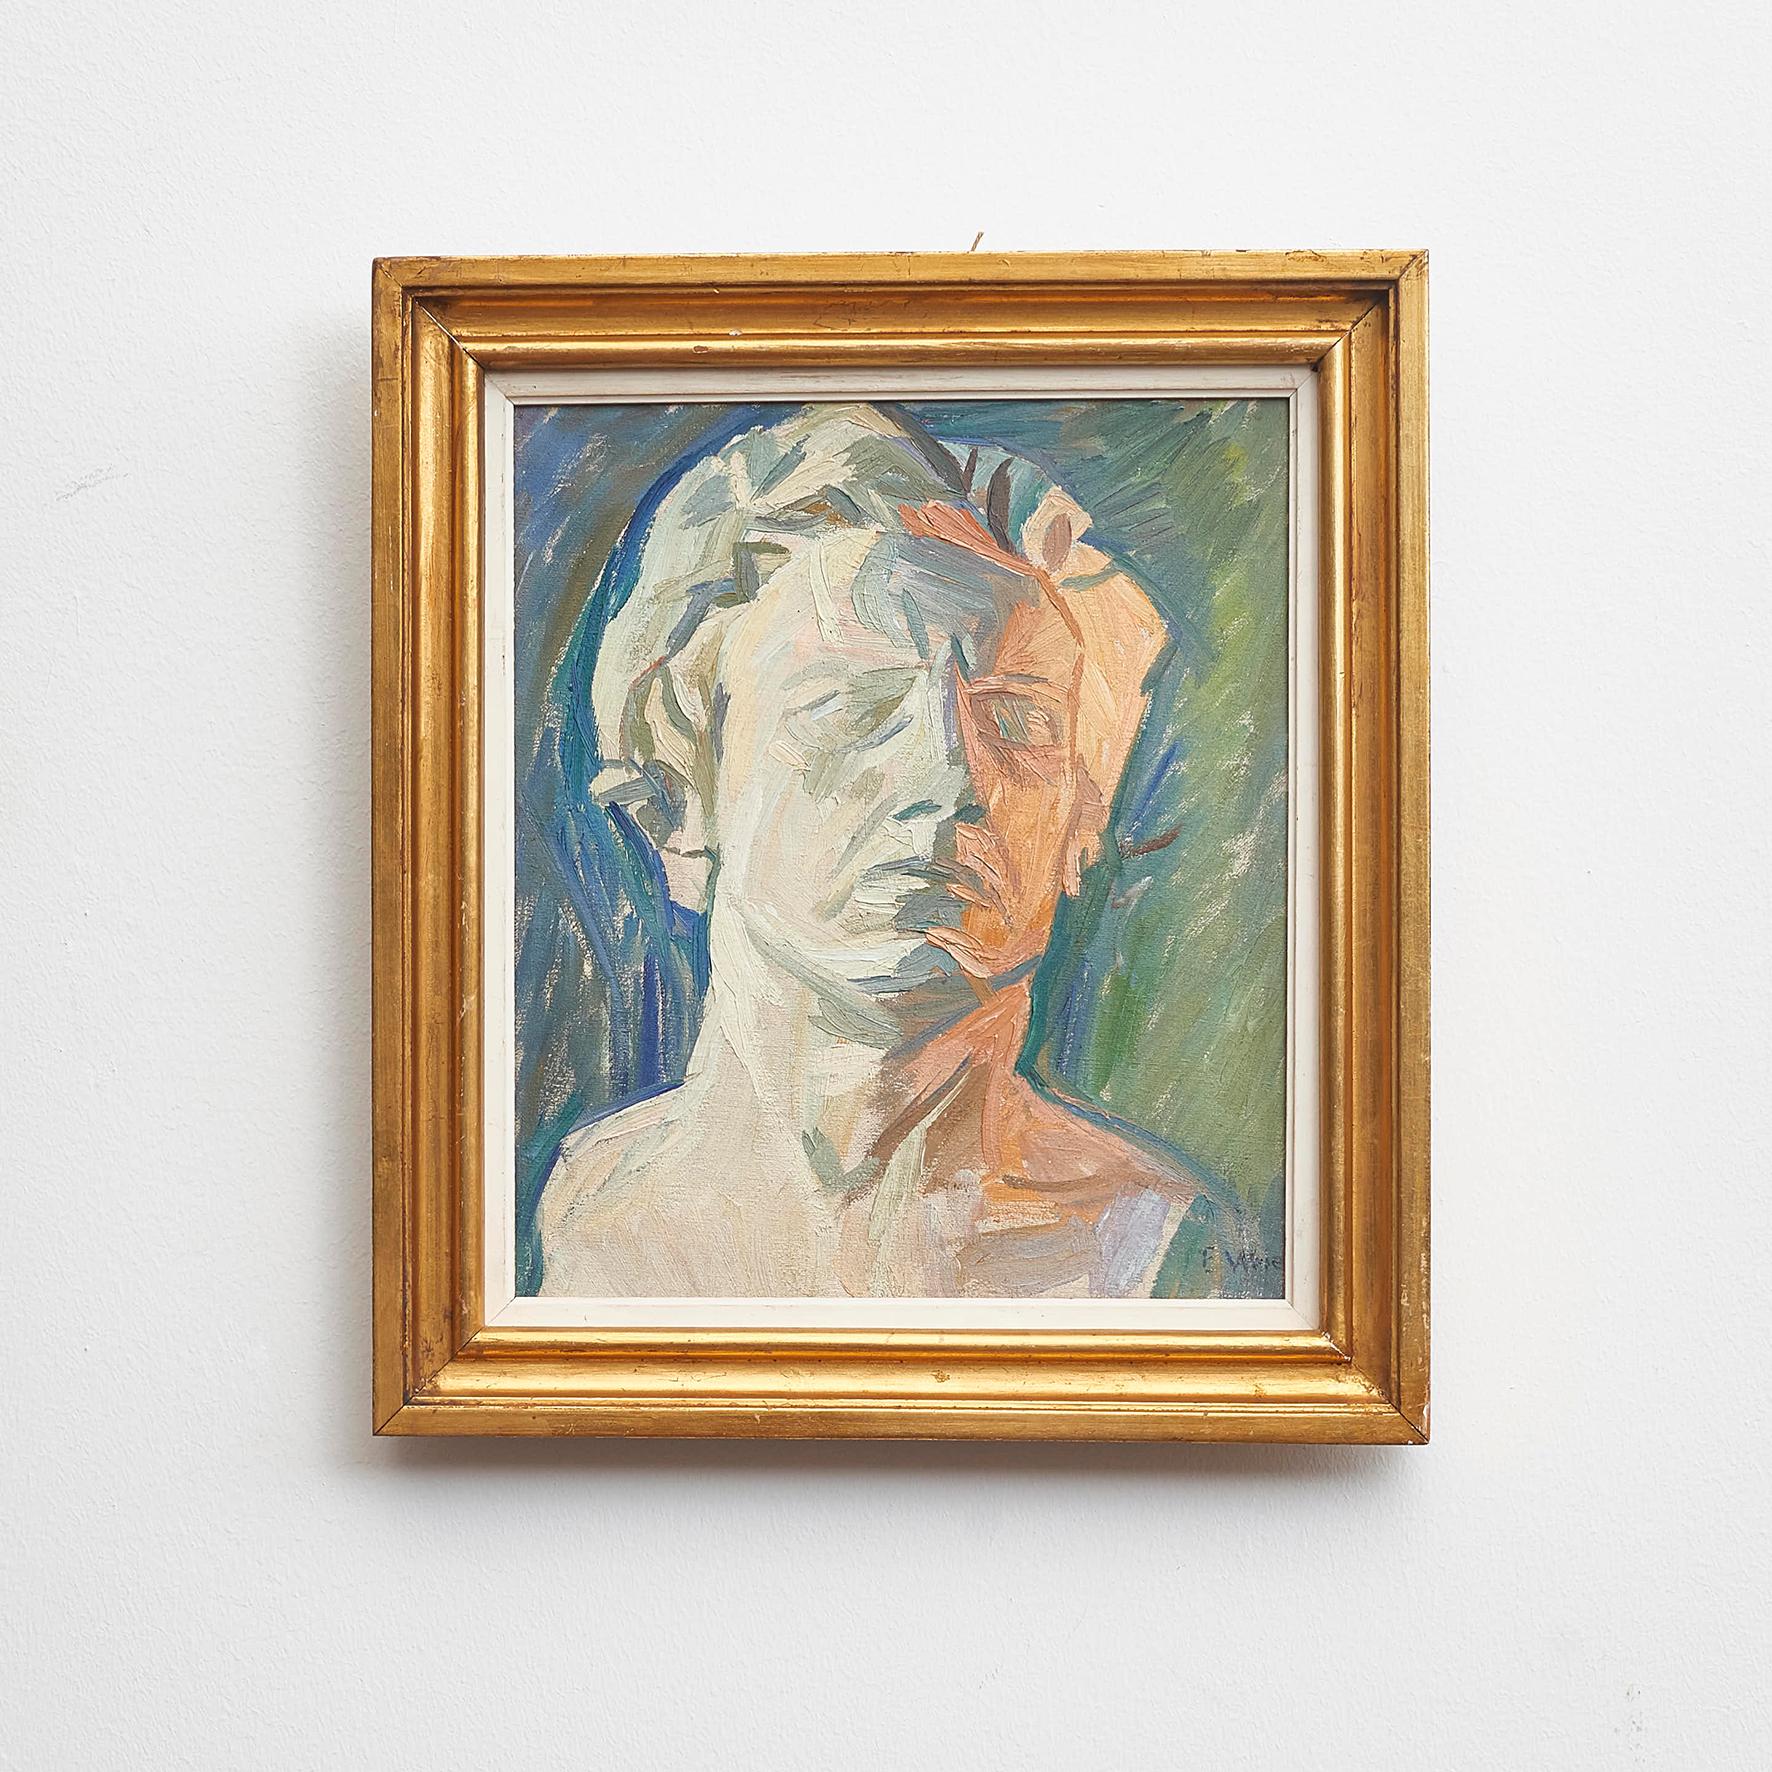 The picture is painted after a bust made by sculptor Jens Lund when Weie lent his studio in Amaliegade 23 up to his separate exhibition in the Art Association in March 1915.
Oil on canvas. Signed 'E. Weie' on front of painting.

Viggo Thorvald